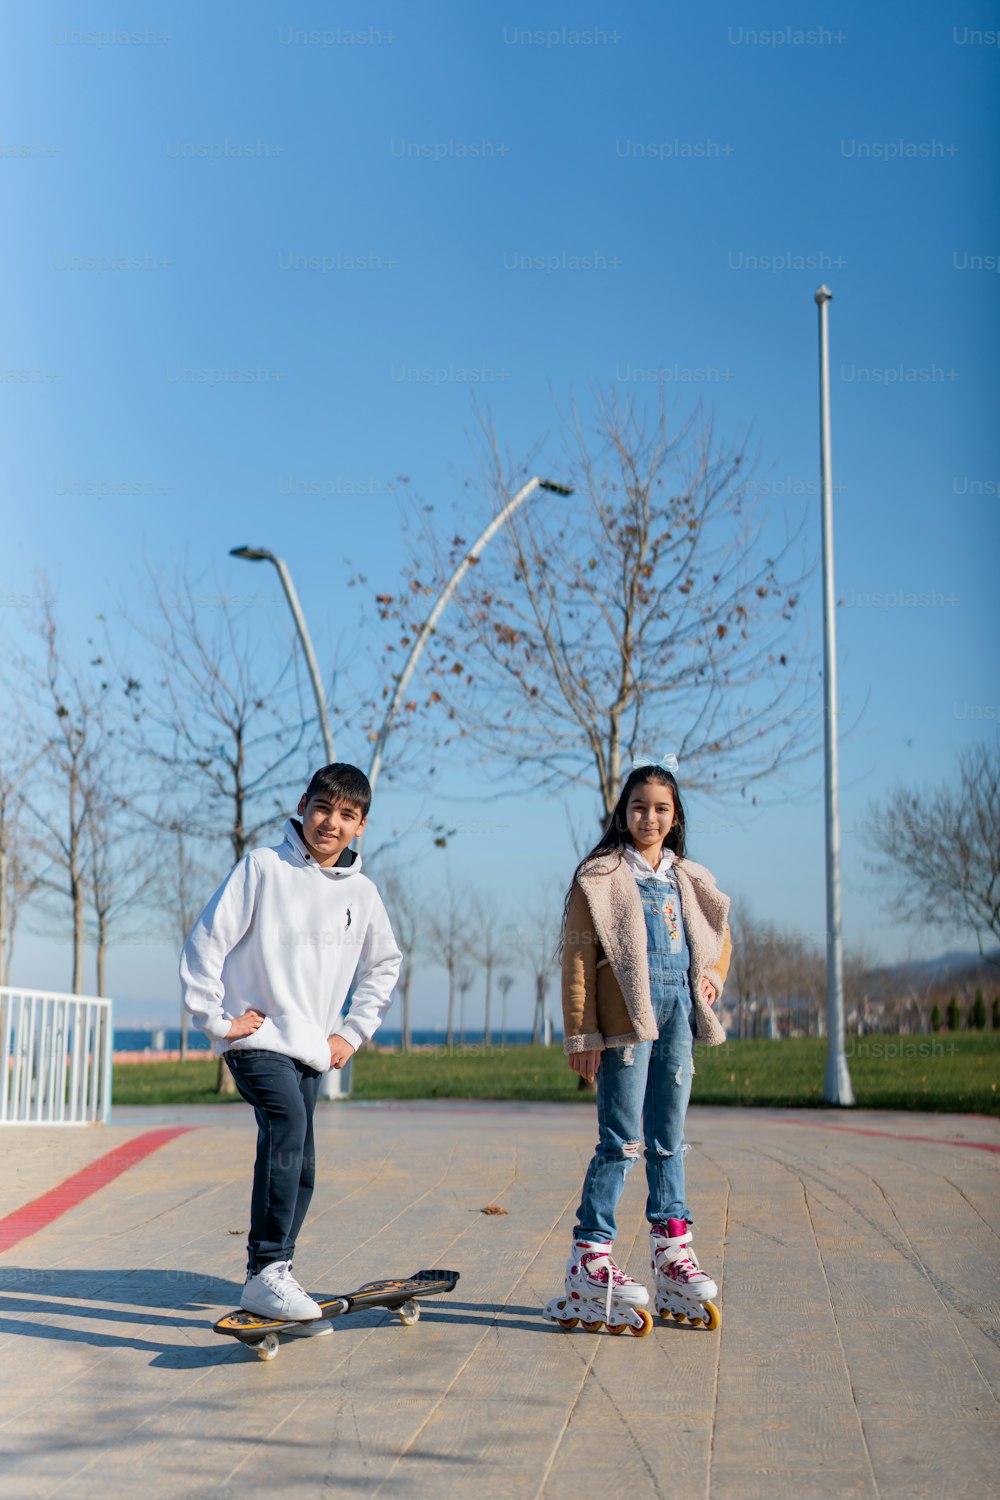 a boy and a girl riding skateboards in a park